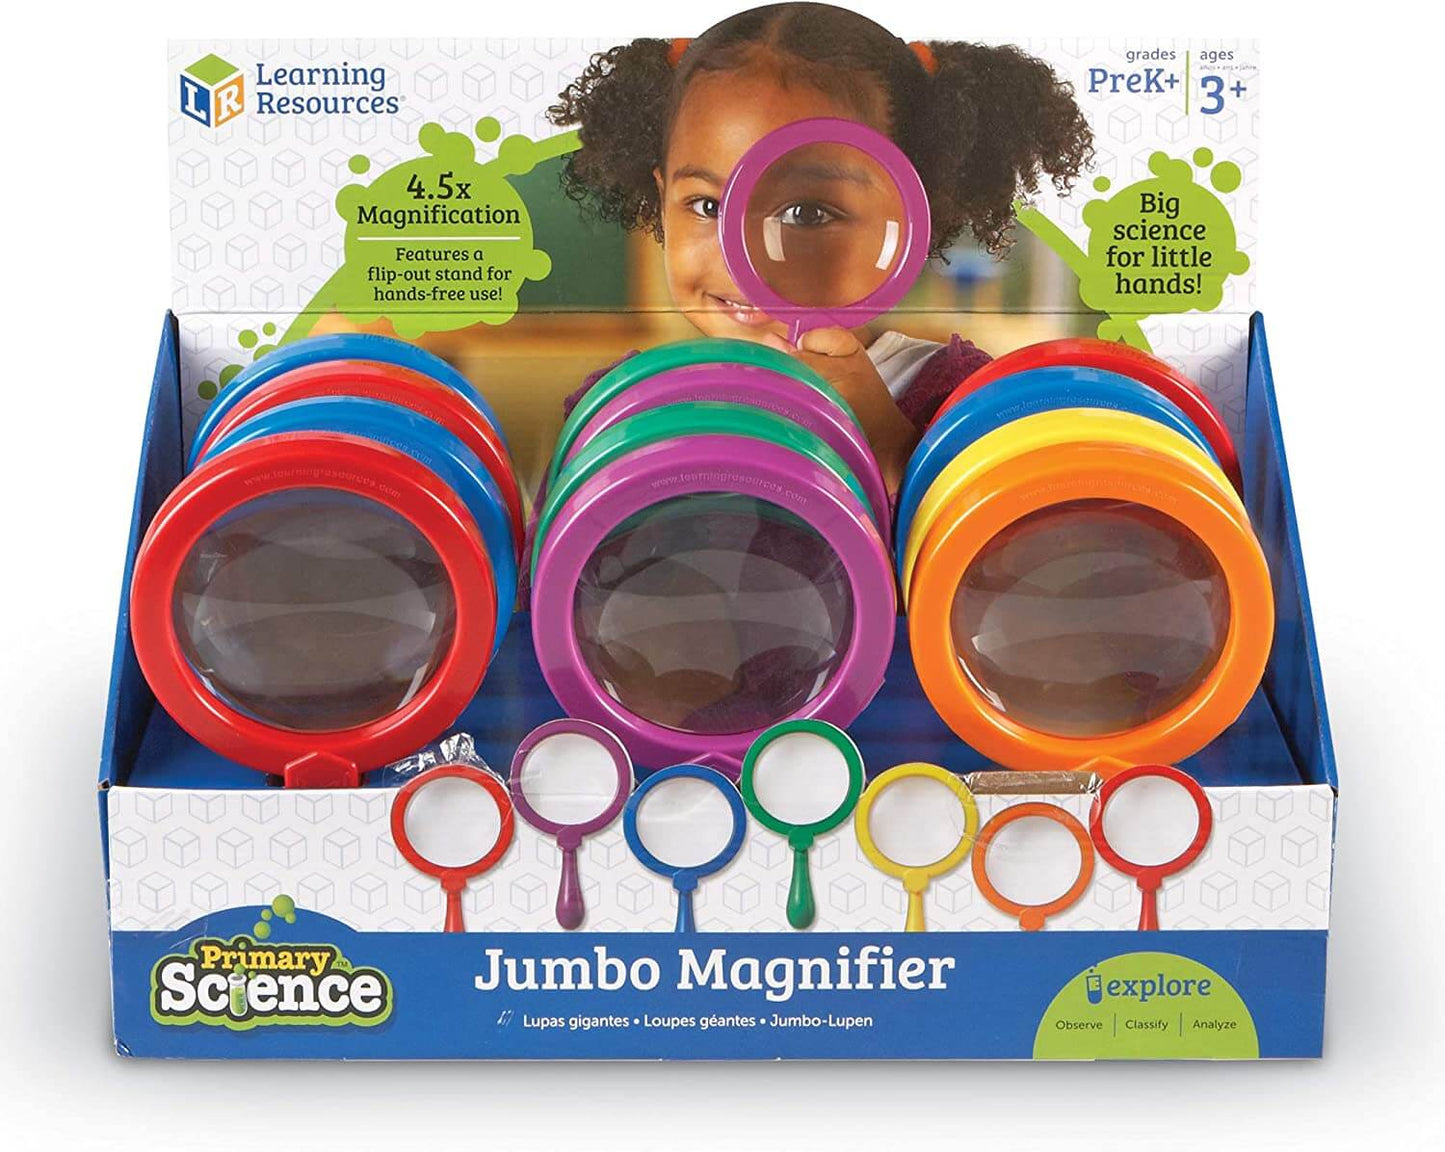 Learning Resources Primary Science Jumbo Magnifiers (Colours Vary)